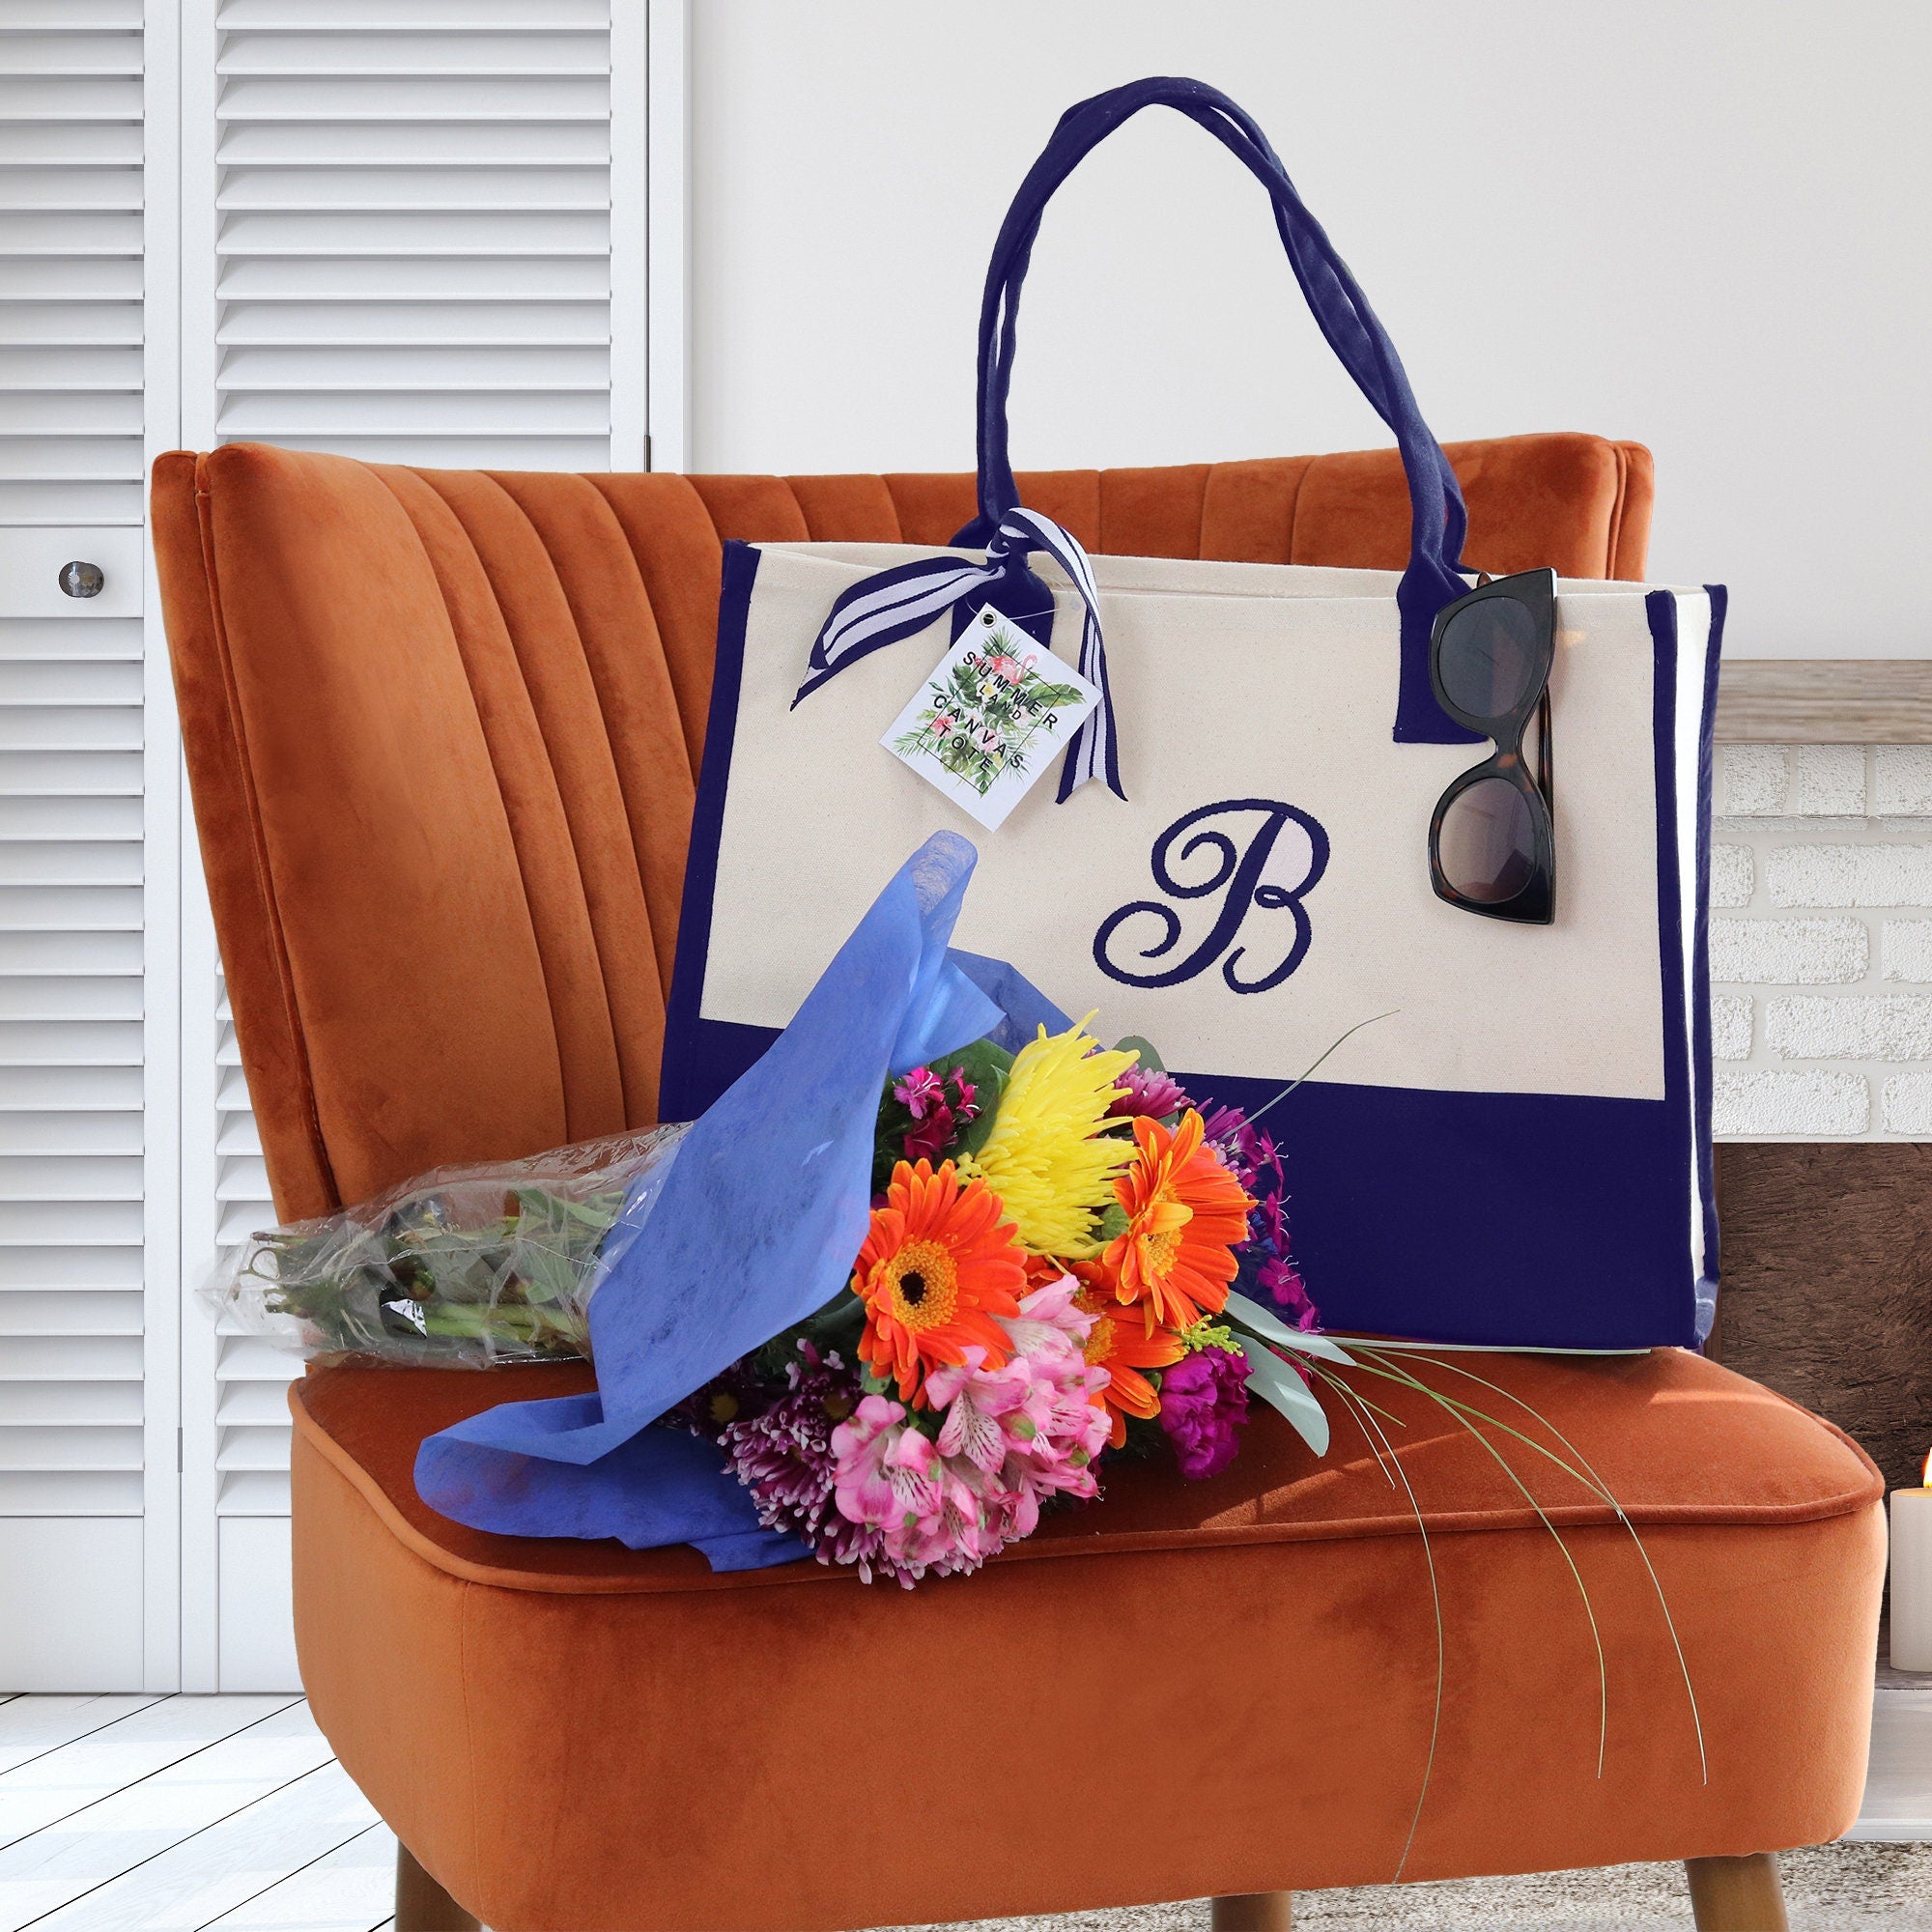 Tote bag aesthetic Embroidery Initial Monogram Large Tote Bag , 100% Cotton Canvas, Bridesmaid Bachelorette Gift Navy